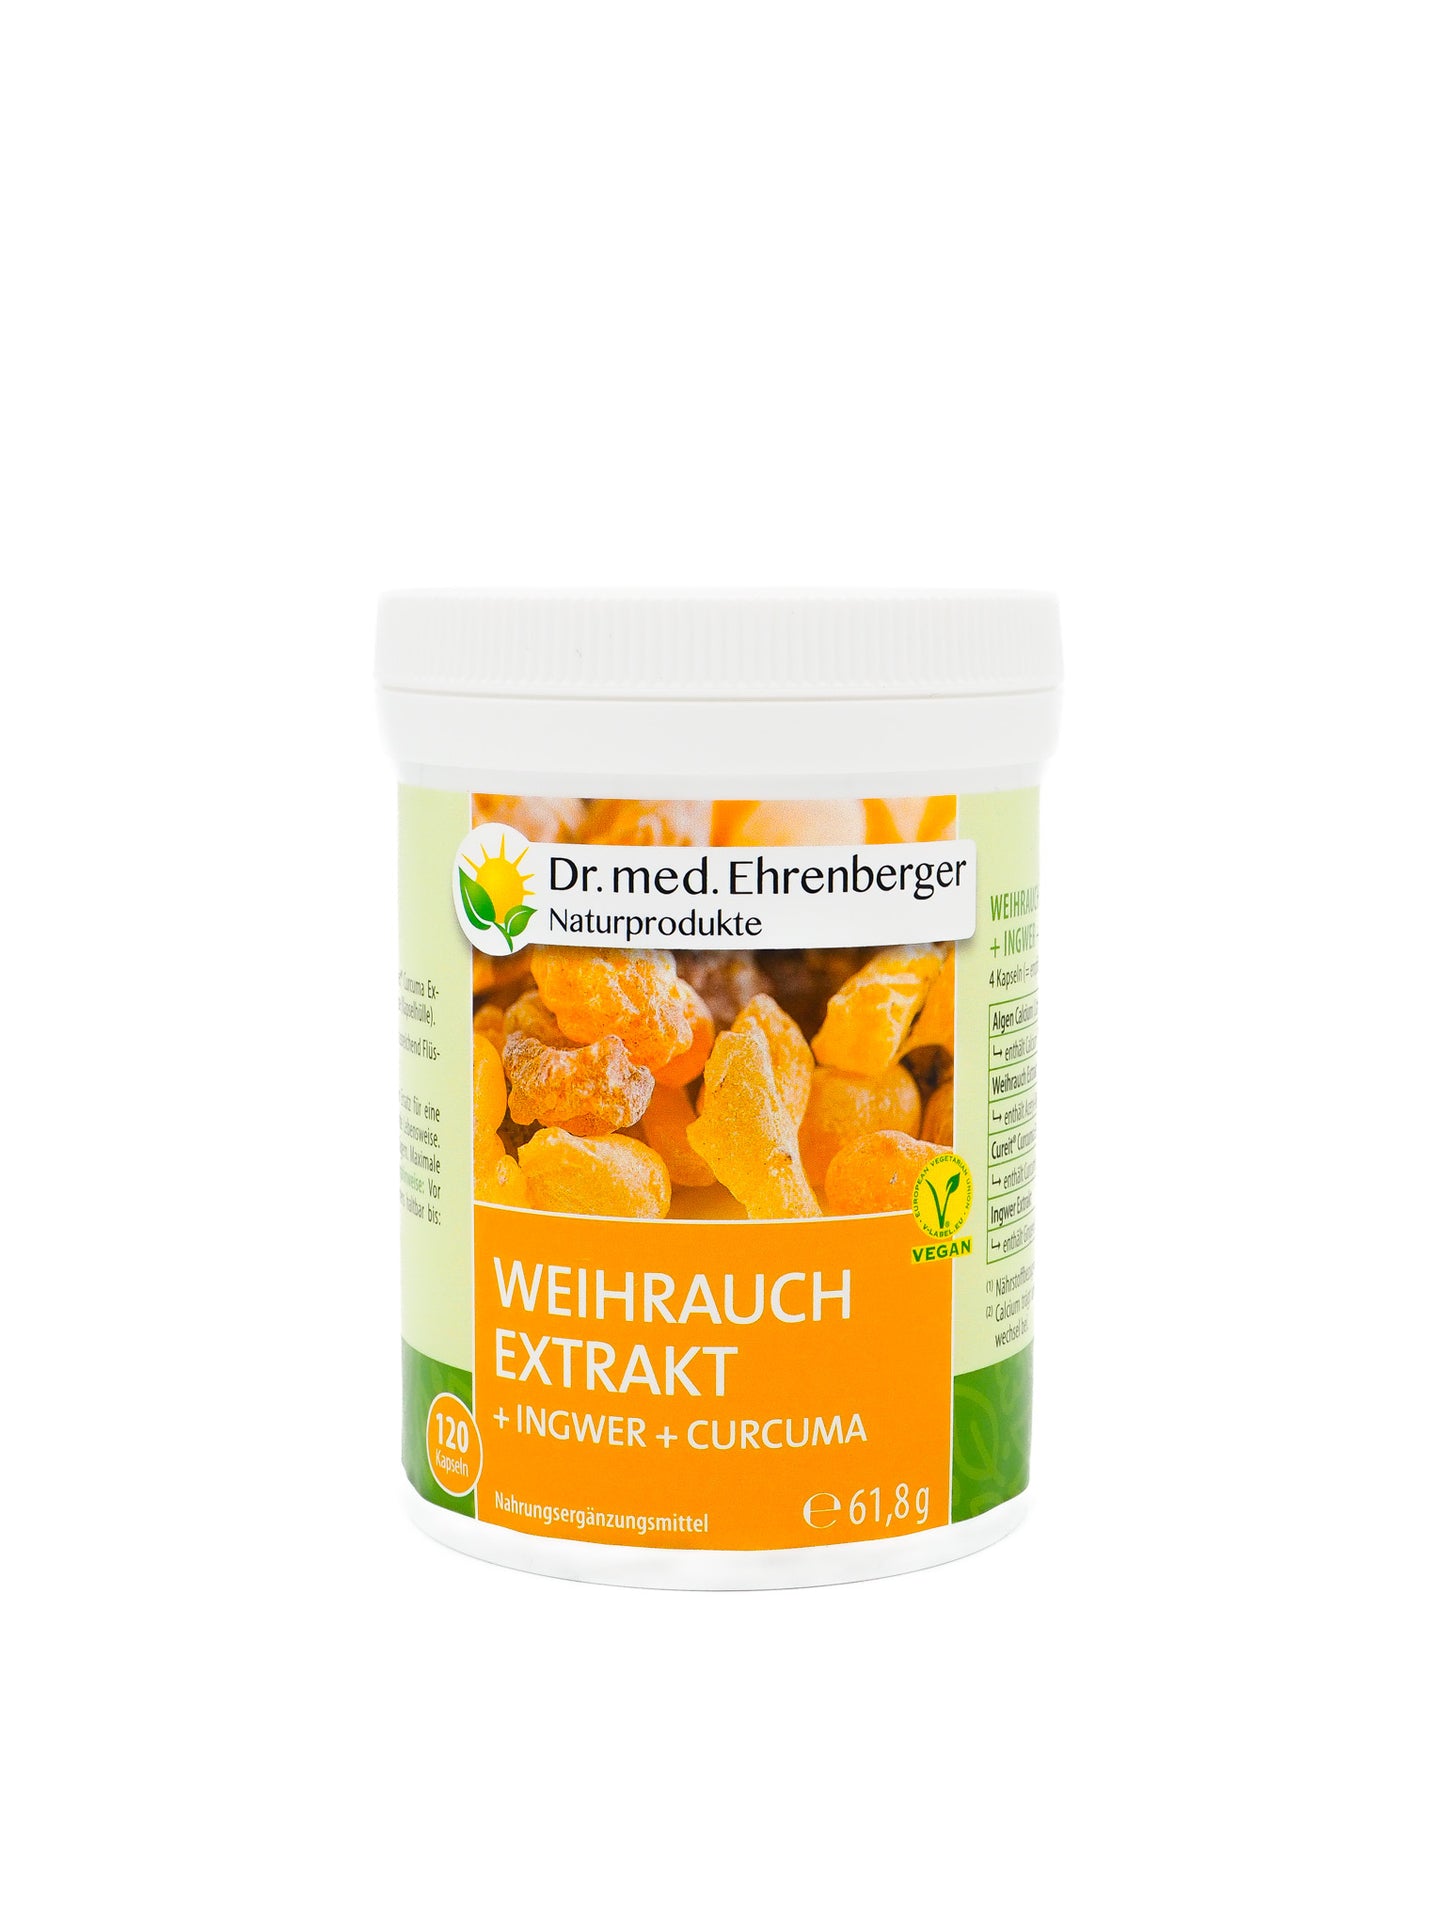 Dr. Ehrenberger - Incense Extract + Ginger + Turmeric Capsules